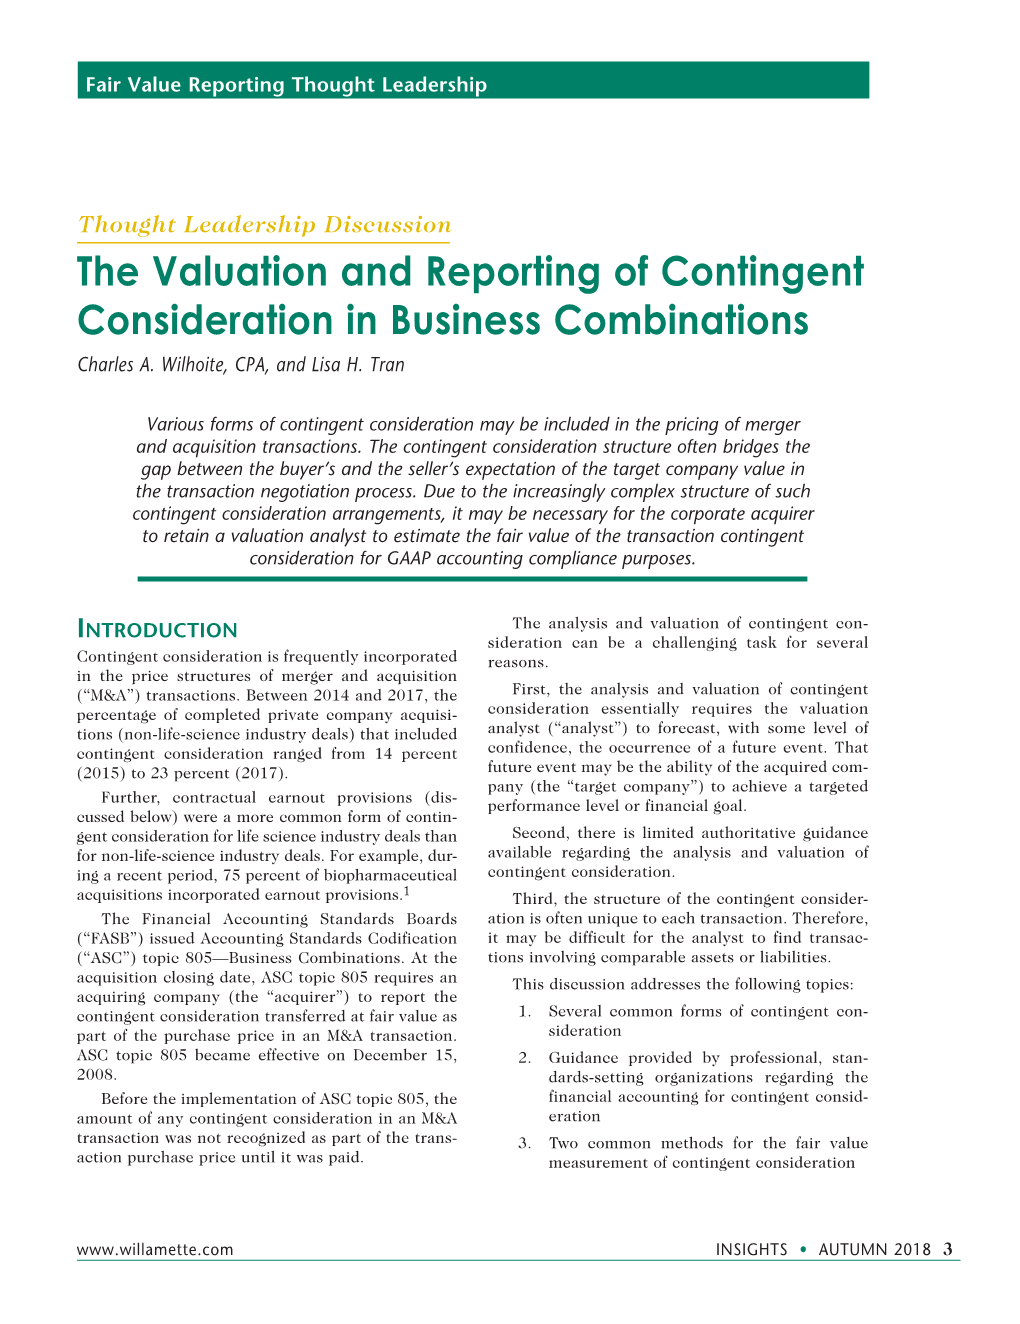 The Valuation and Reporting of Contingent Consideration in Business Combinations Charles A